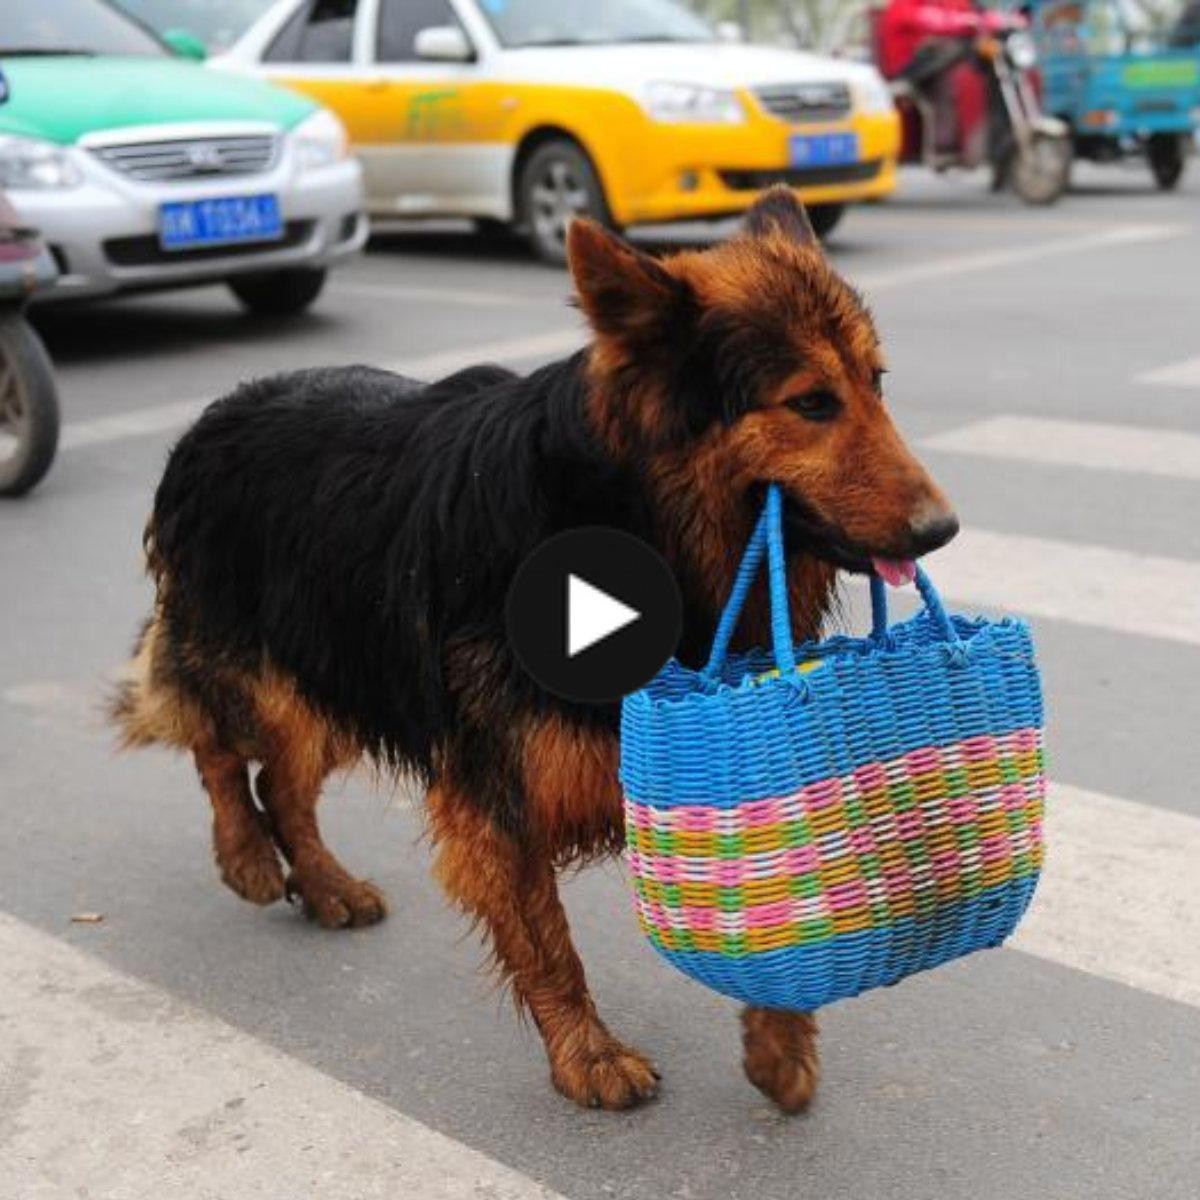 Daily dedication: Max the dog inspires millions of people with his touching affection by walking more than 3 km every day to get food for an elderly person at home.